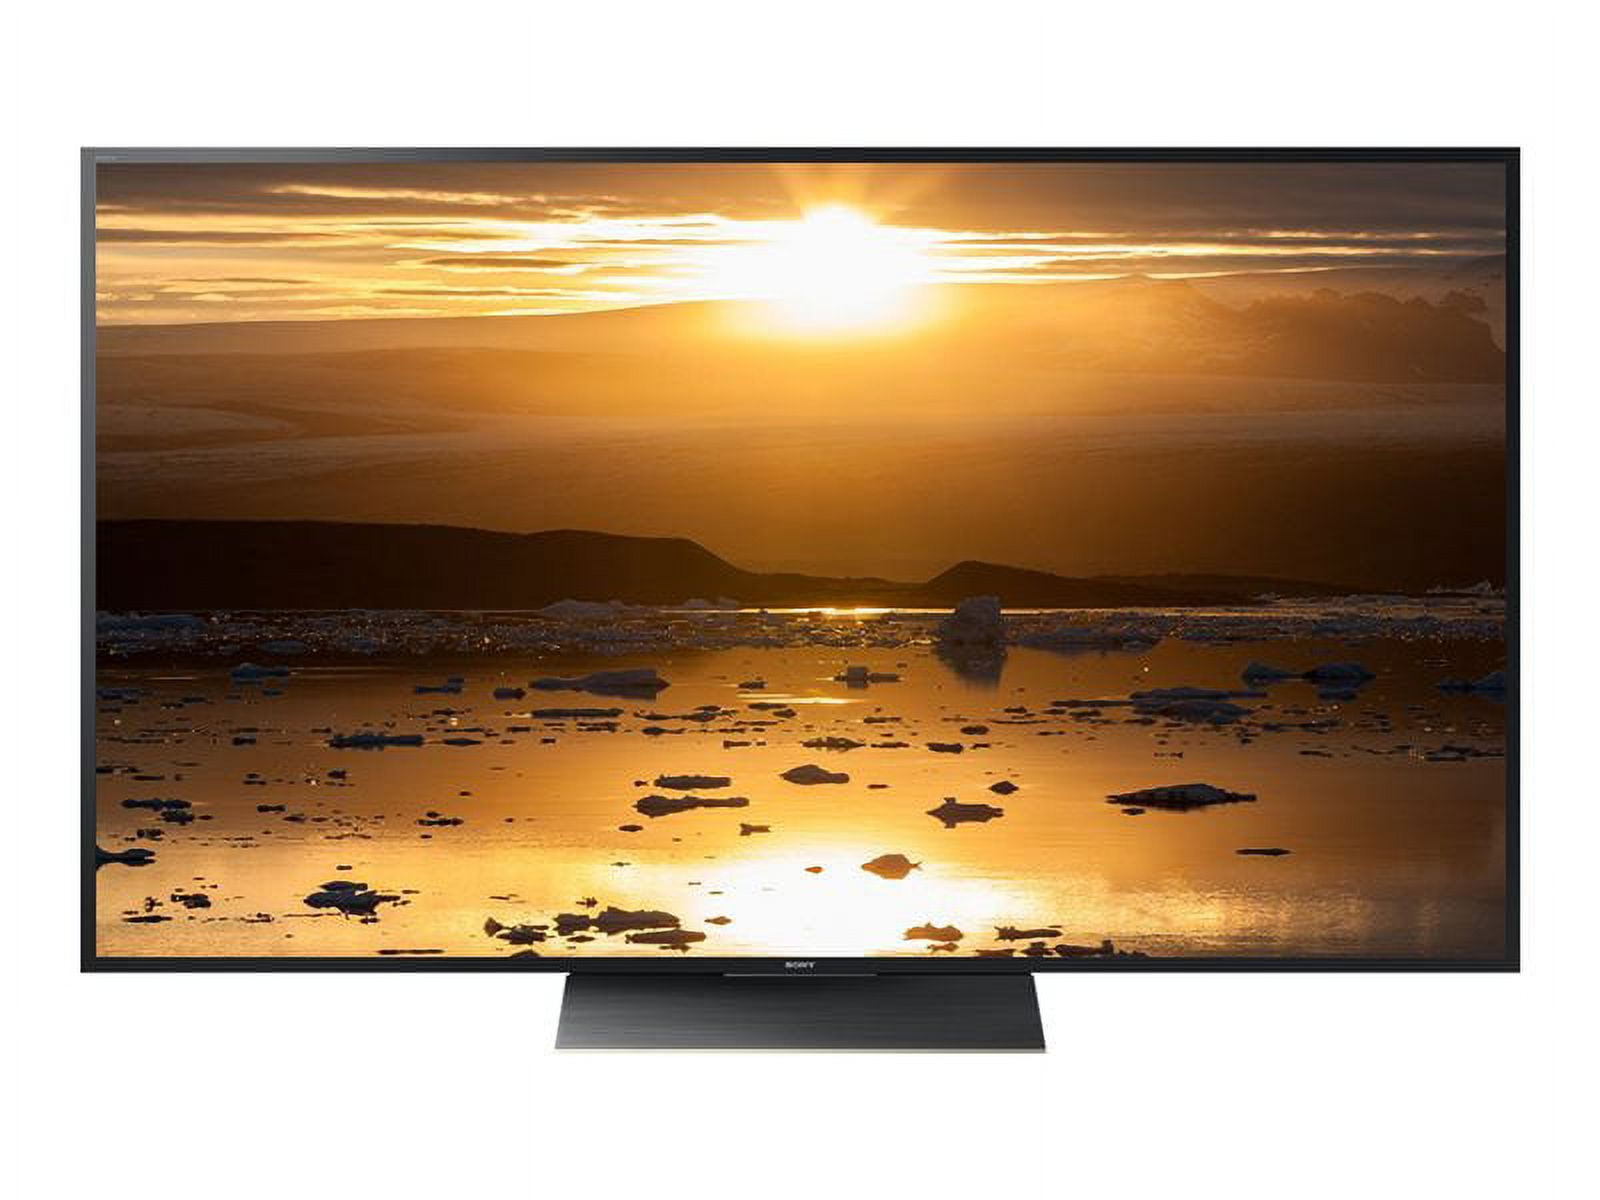 Best Buy: Sony 100 Class LED Z9D Series 2160p Smart 4K UHD TV with HDR  XBR100Z9D